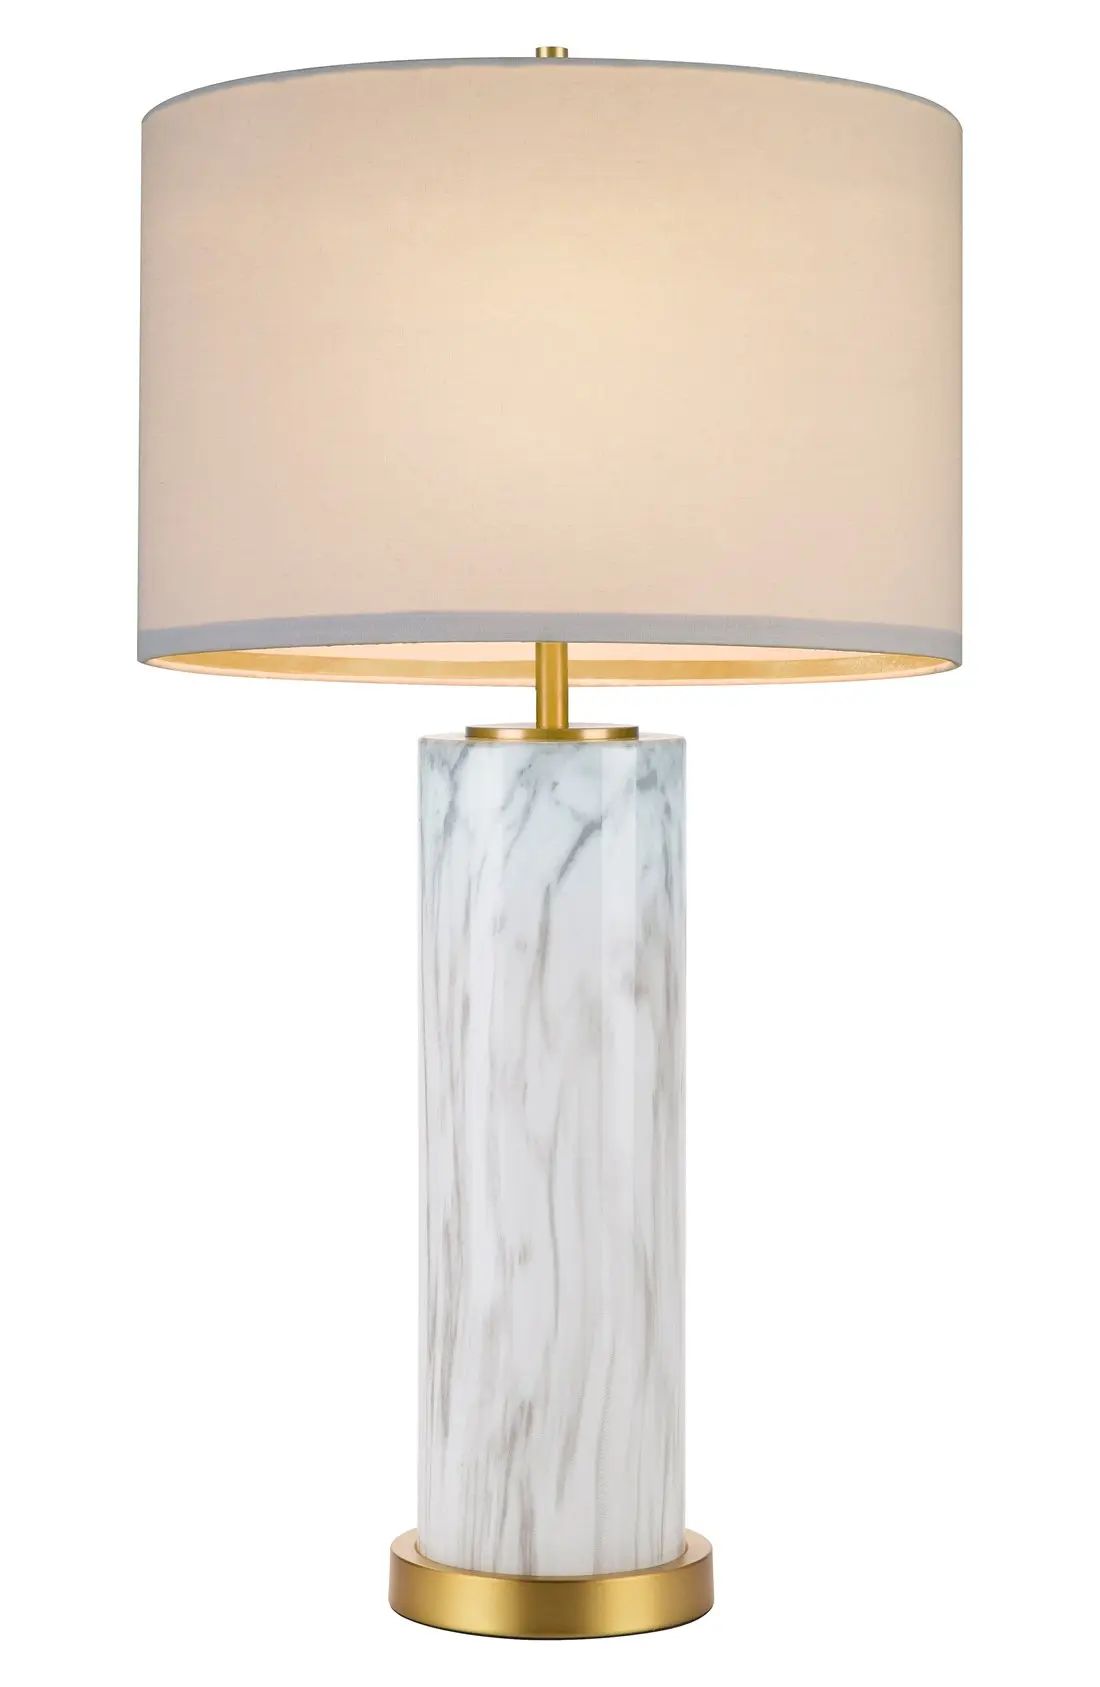 Marble Column Table Lamp | Nordstrom